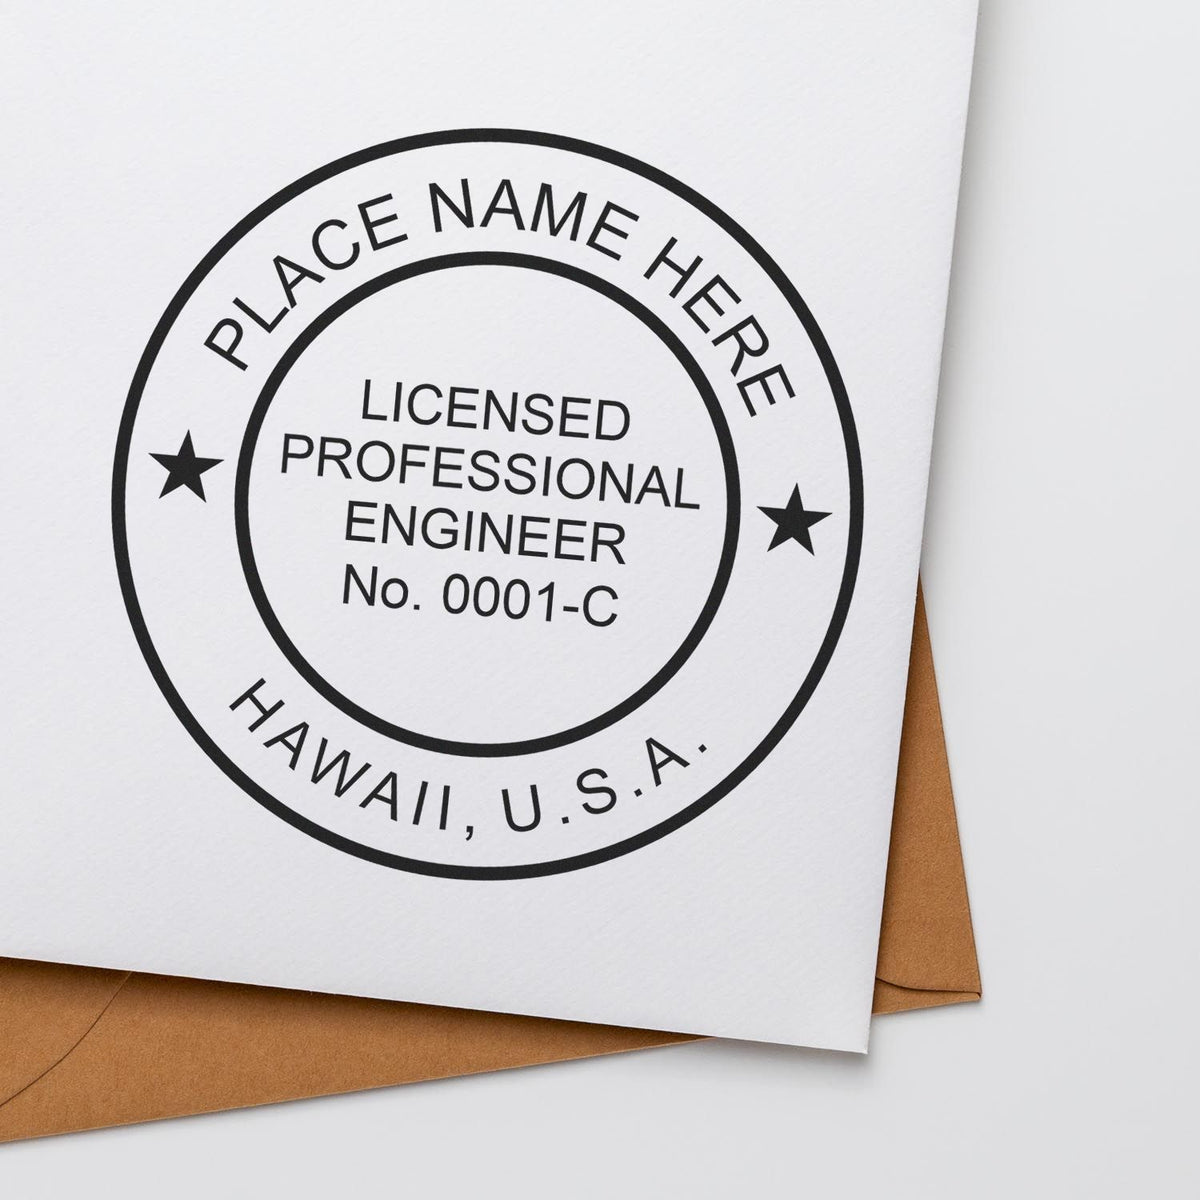 This paper is stamped with a sample imprint of the Hawaii Professional Engineer Seal Stamp, signifying its quality and reliability.